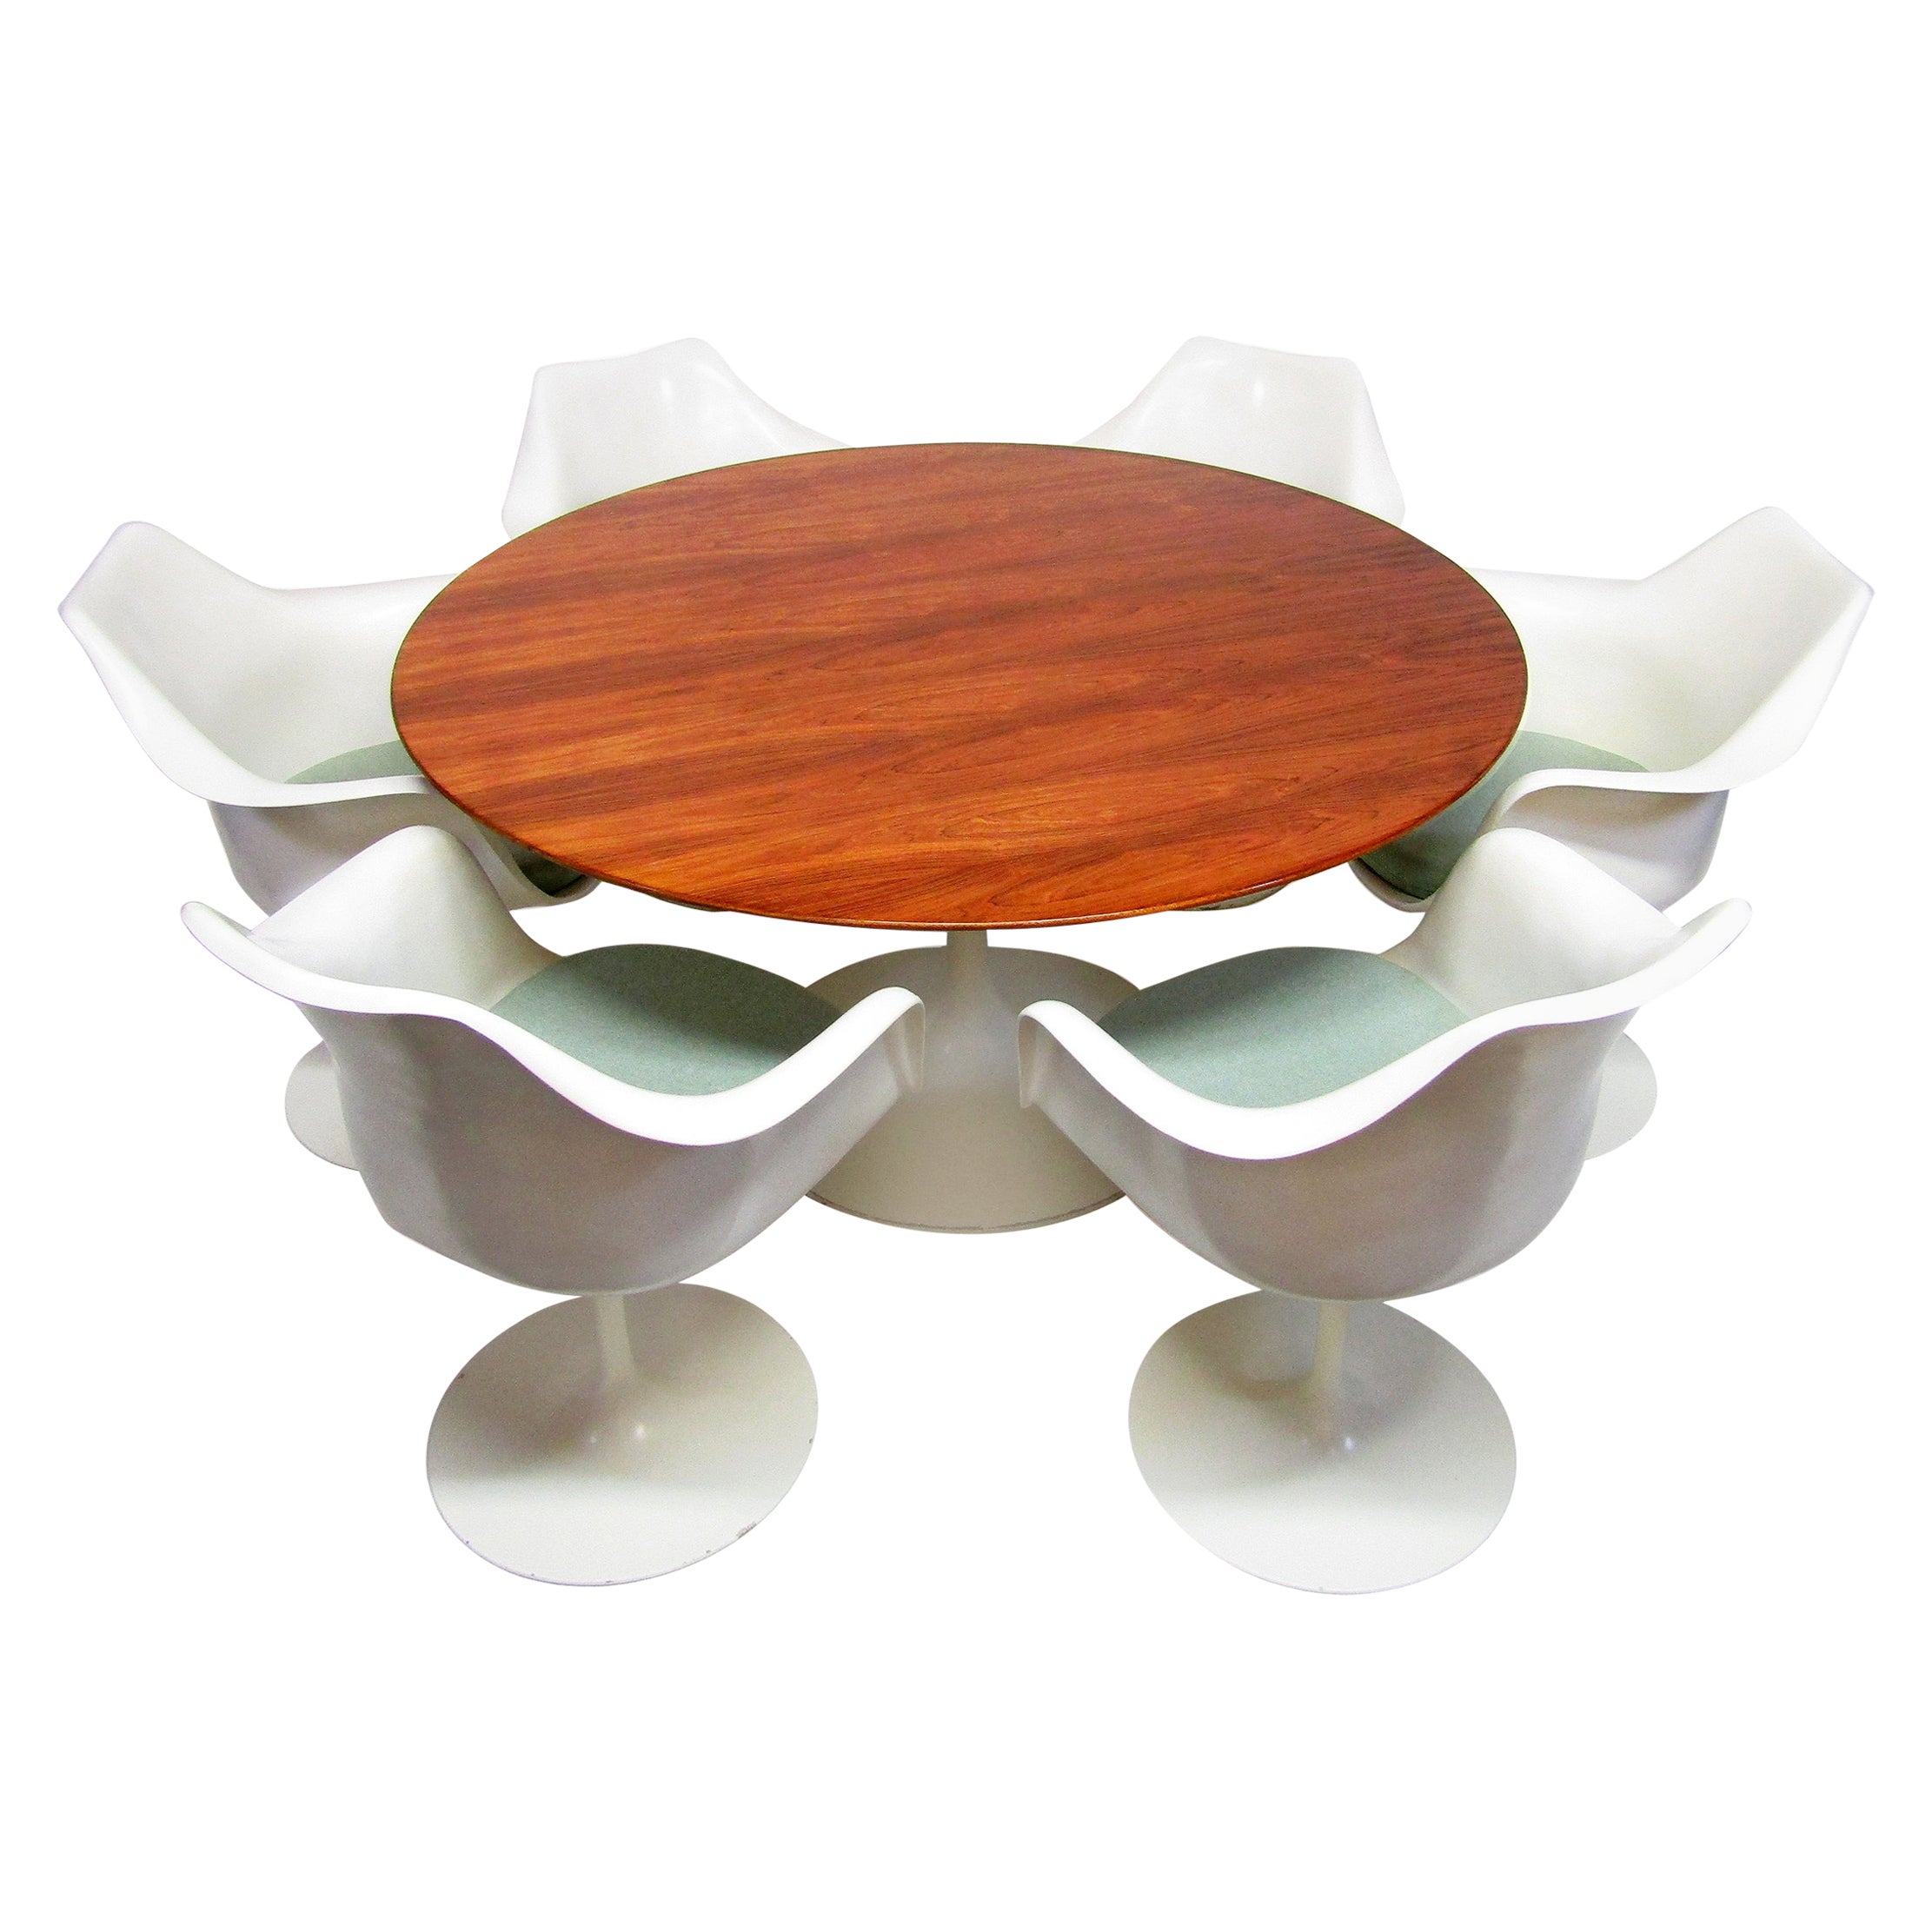 1970s Rosewood Tulip Dining Table & Six Chairs Set By Eero Saarinen for Knoll For Sale